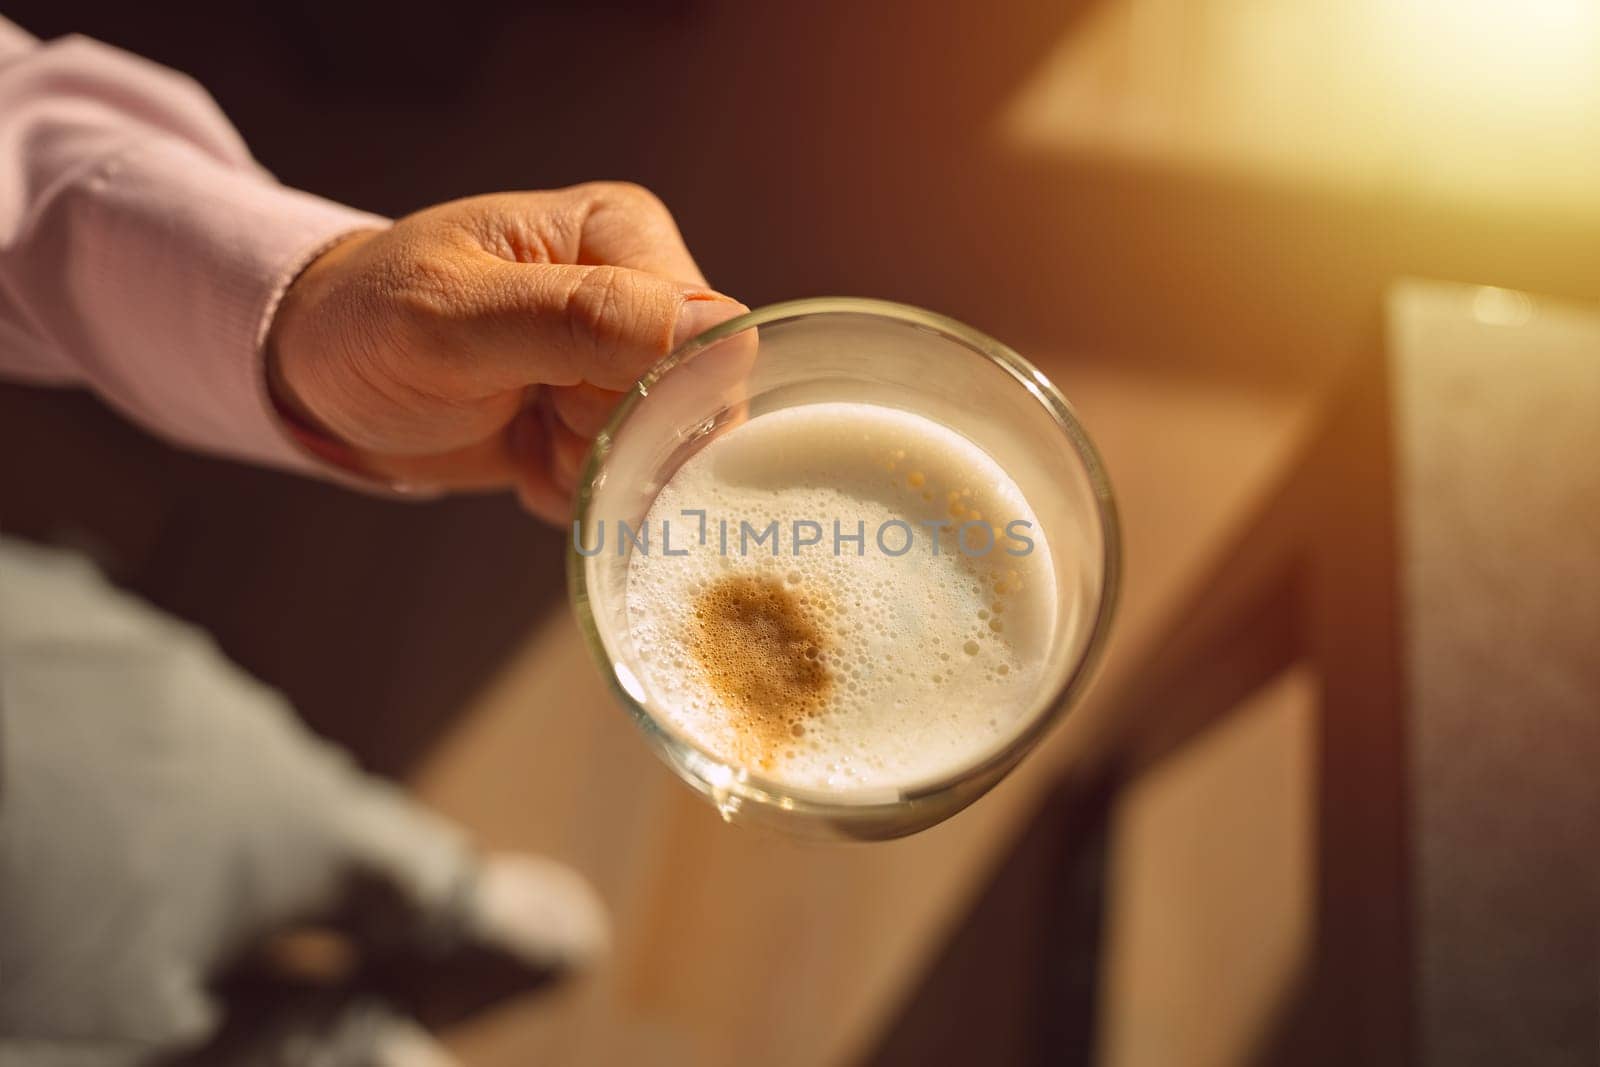 A cozy photo of a hand holding a cup of cappuccino coffee. The photo invokes warm feelings associated with sipping hot drinks before working day. by DariaKulkova